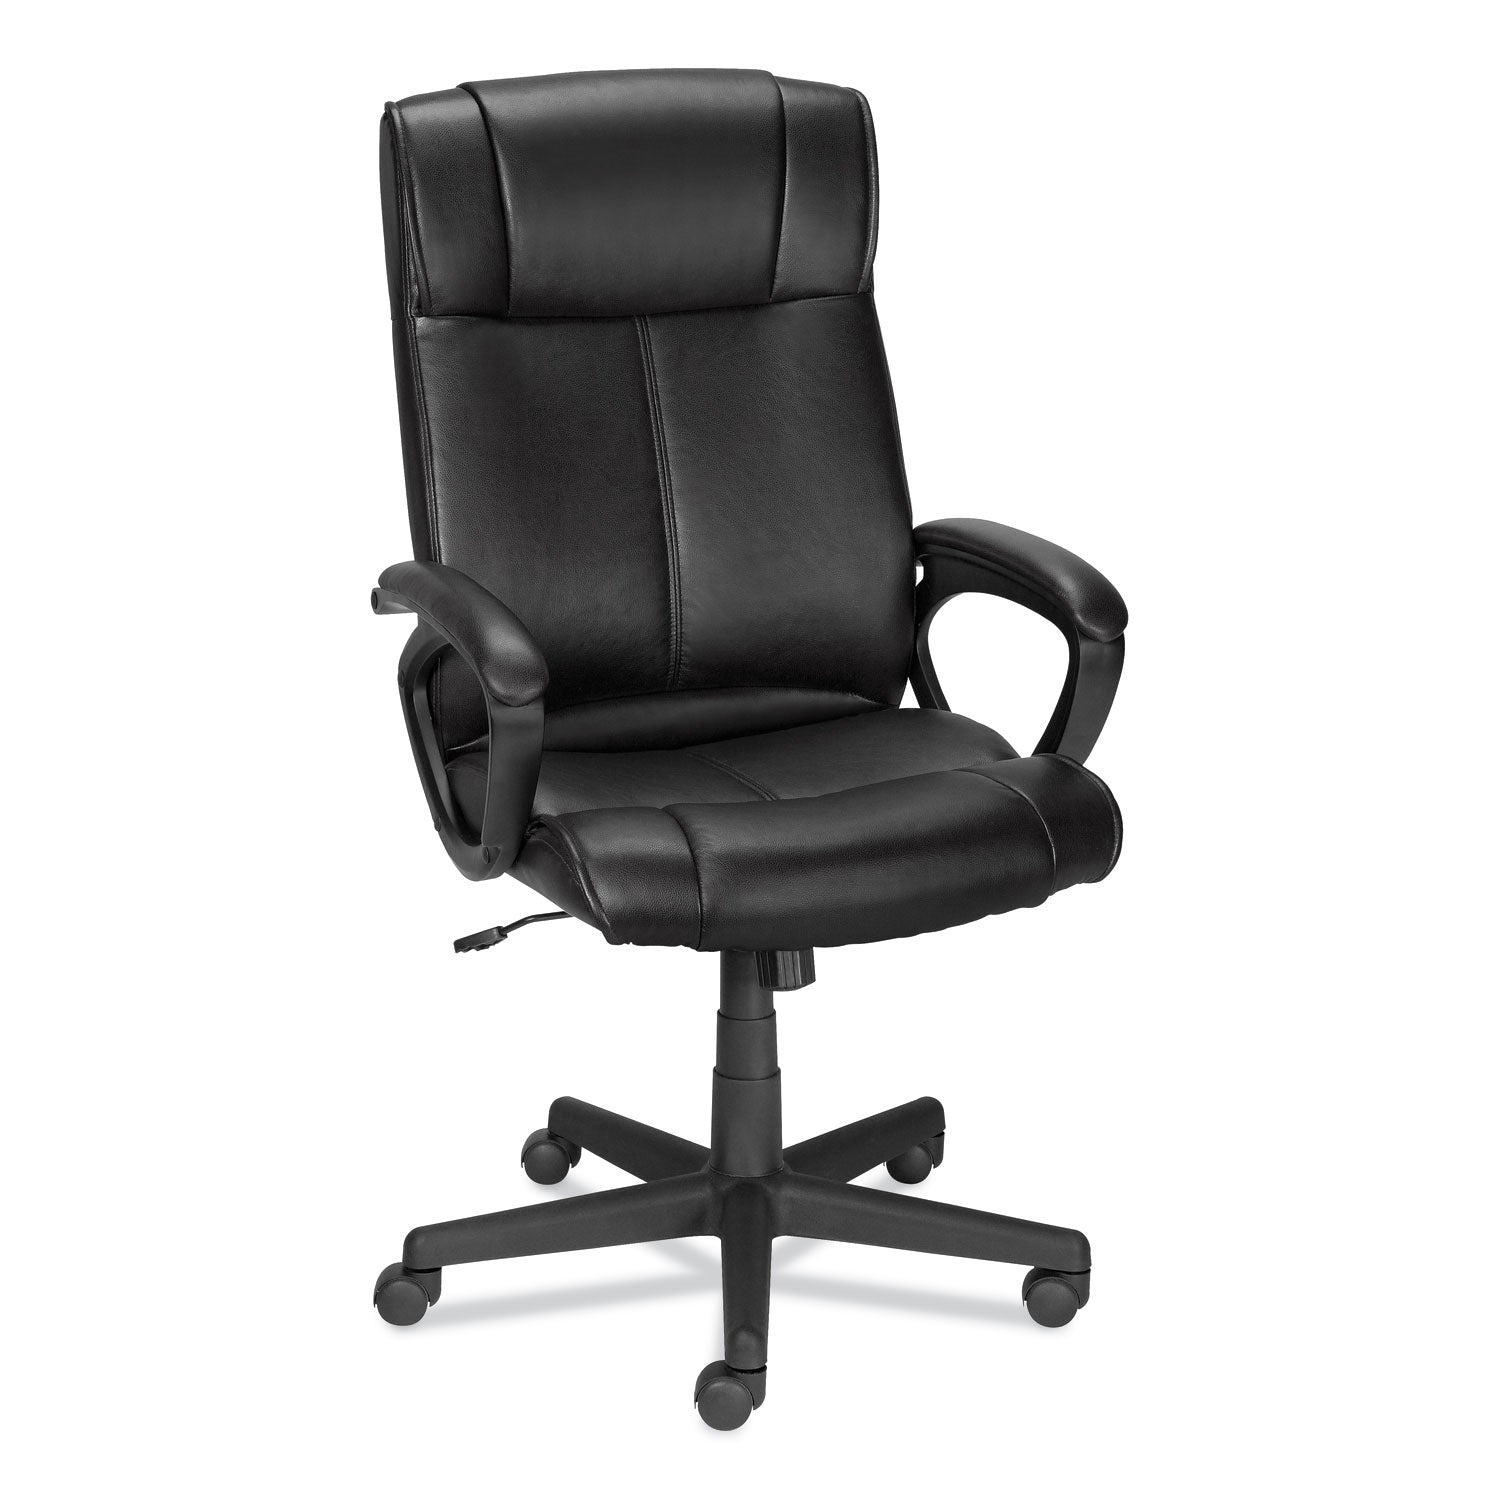 Alera Dalibor Series Manager Chair, Supports Up to 250 lb, 17.5" to 21.3" Seat Height, Black Seat/Back, Black Base - 1